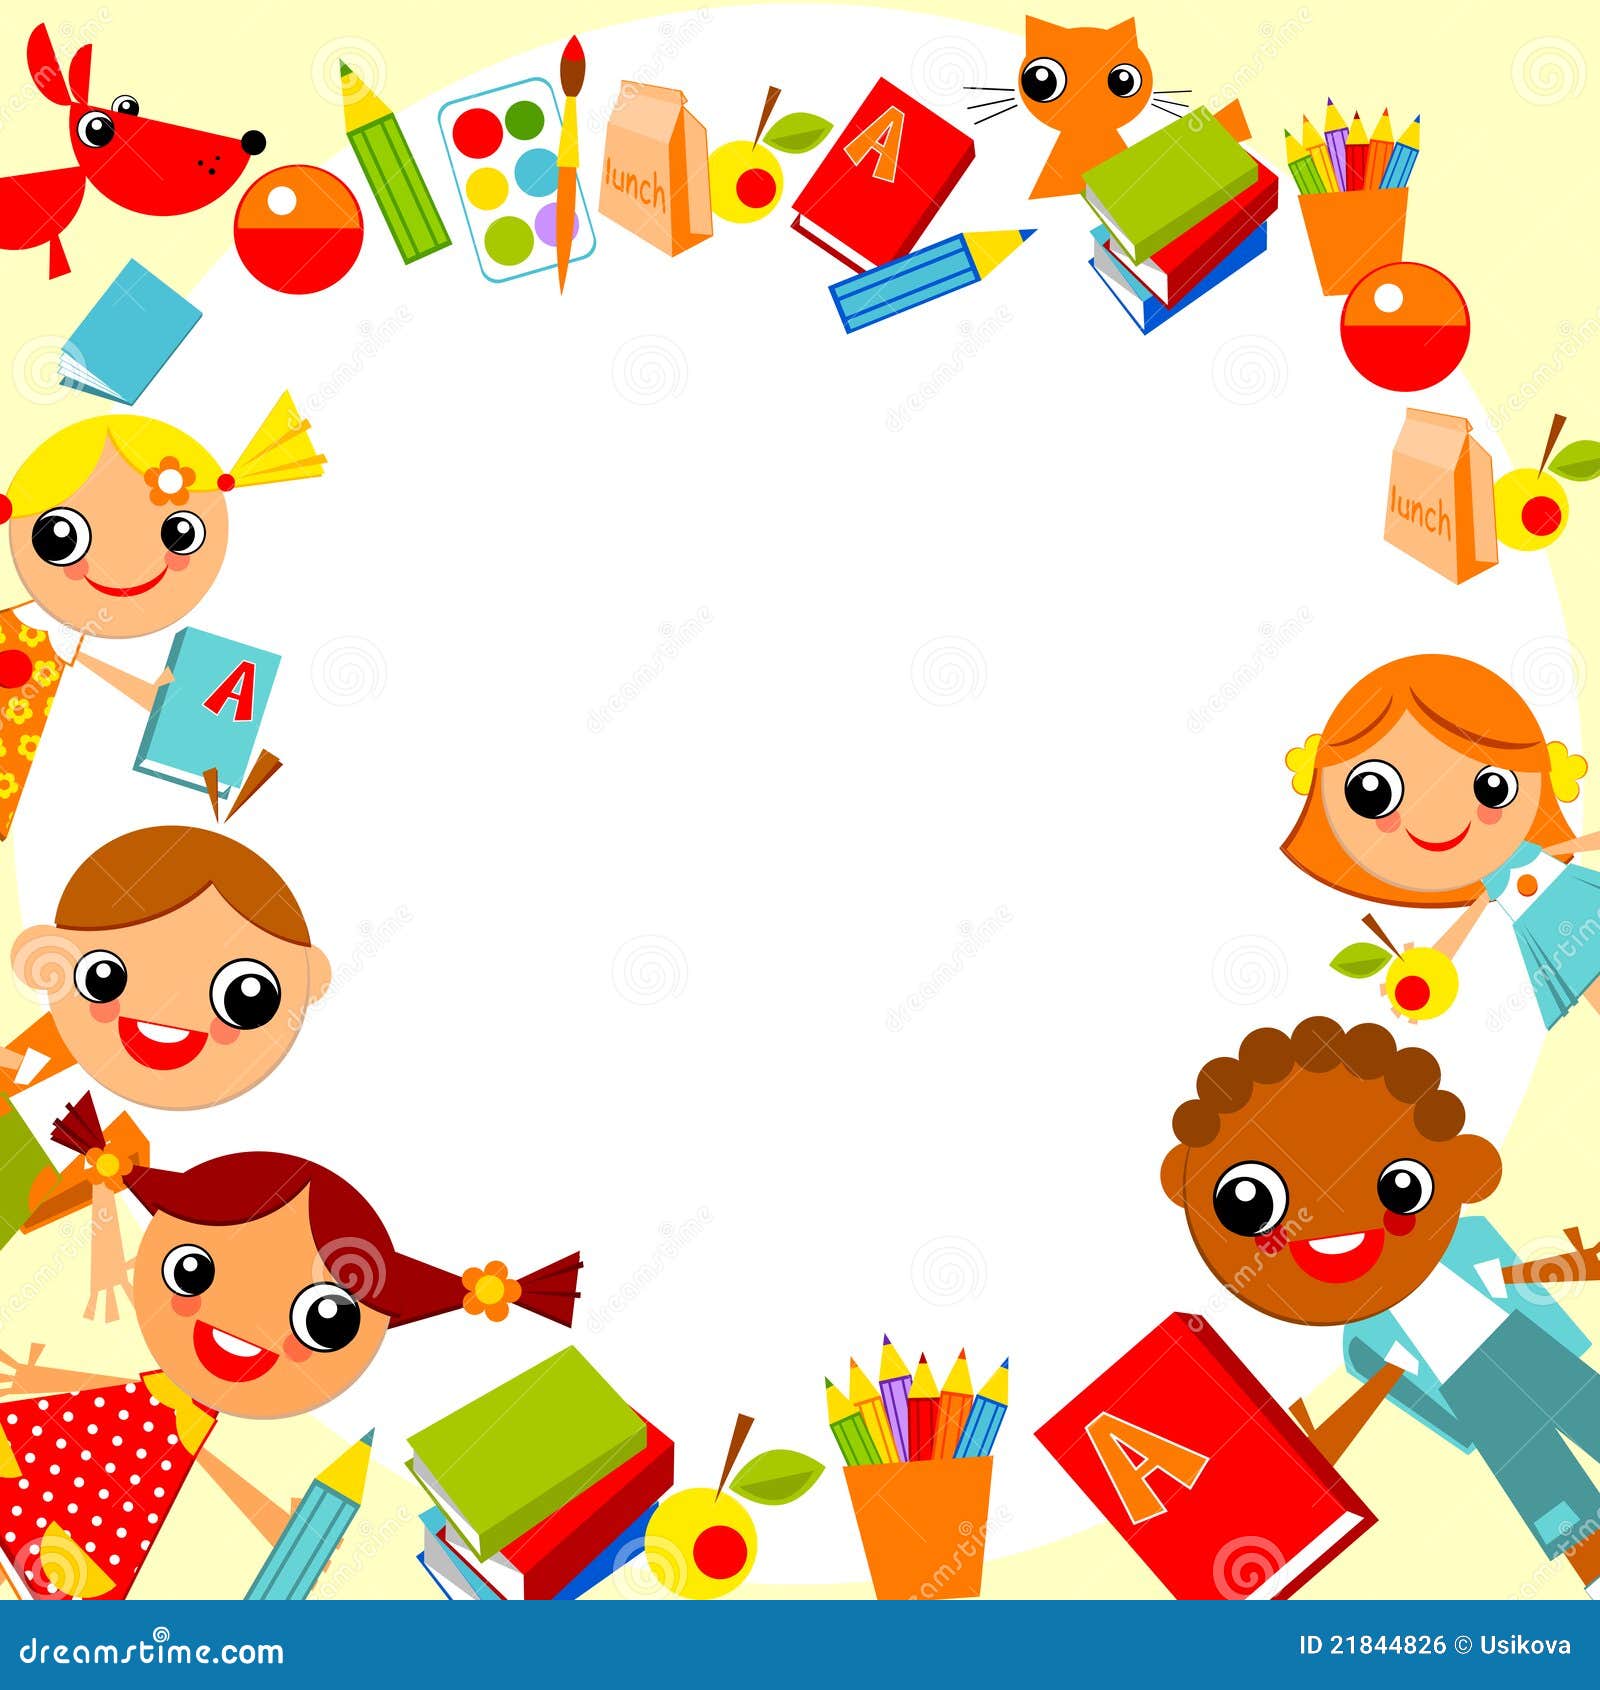 Children's background stock vector. Illustration of colorful - 21844826